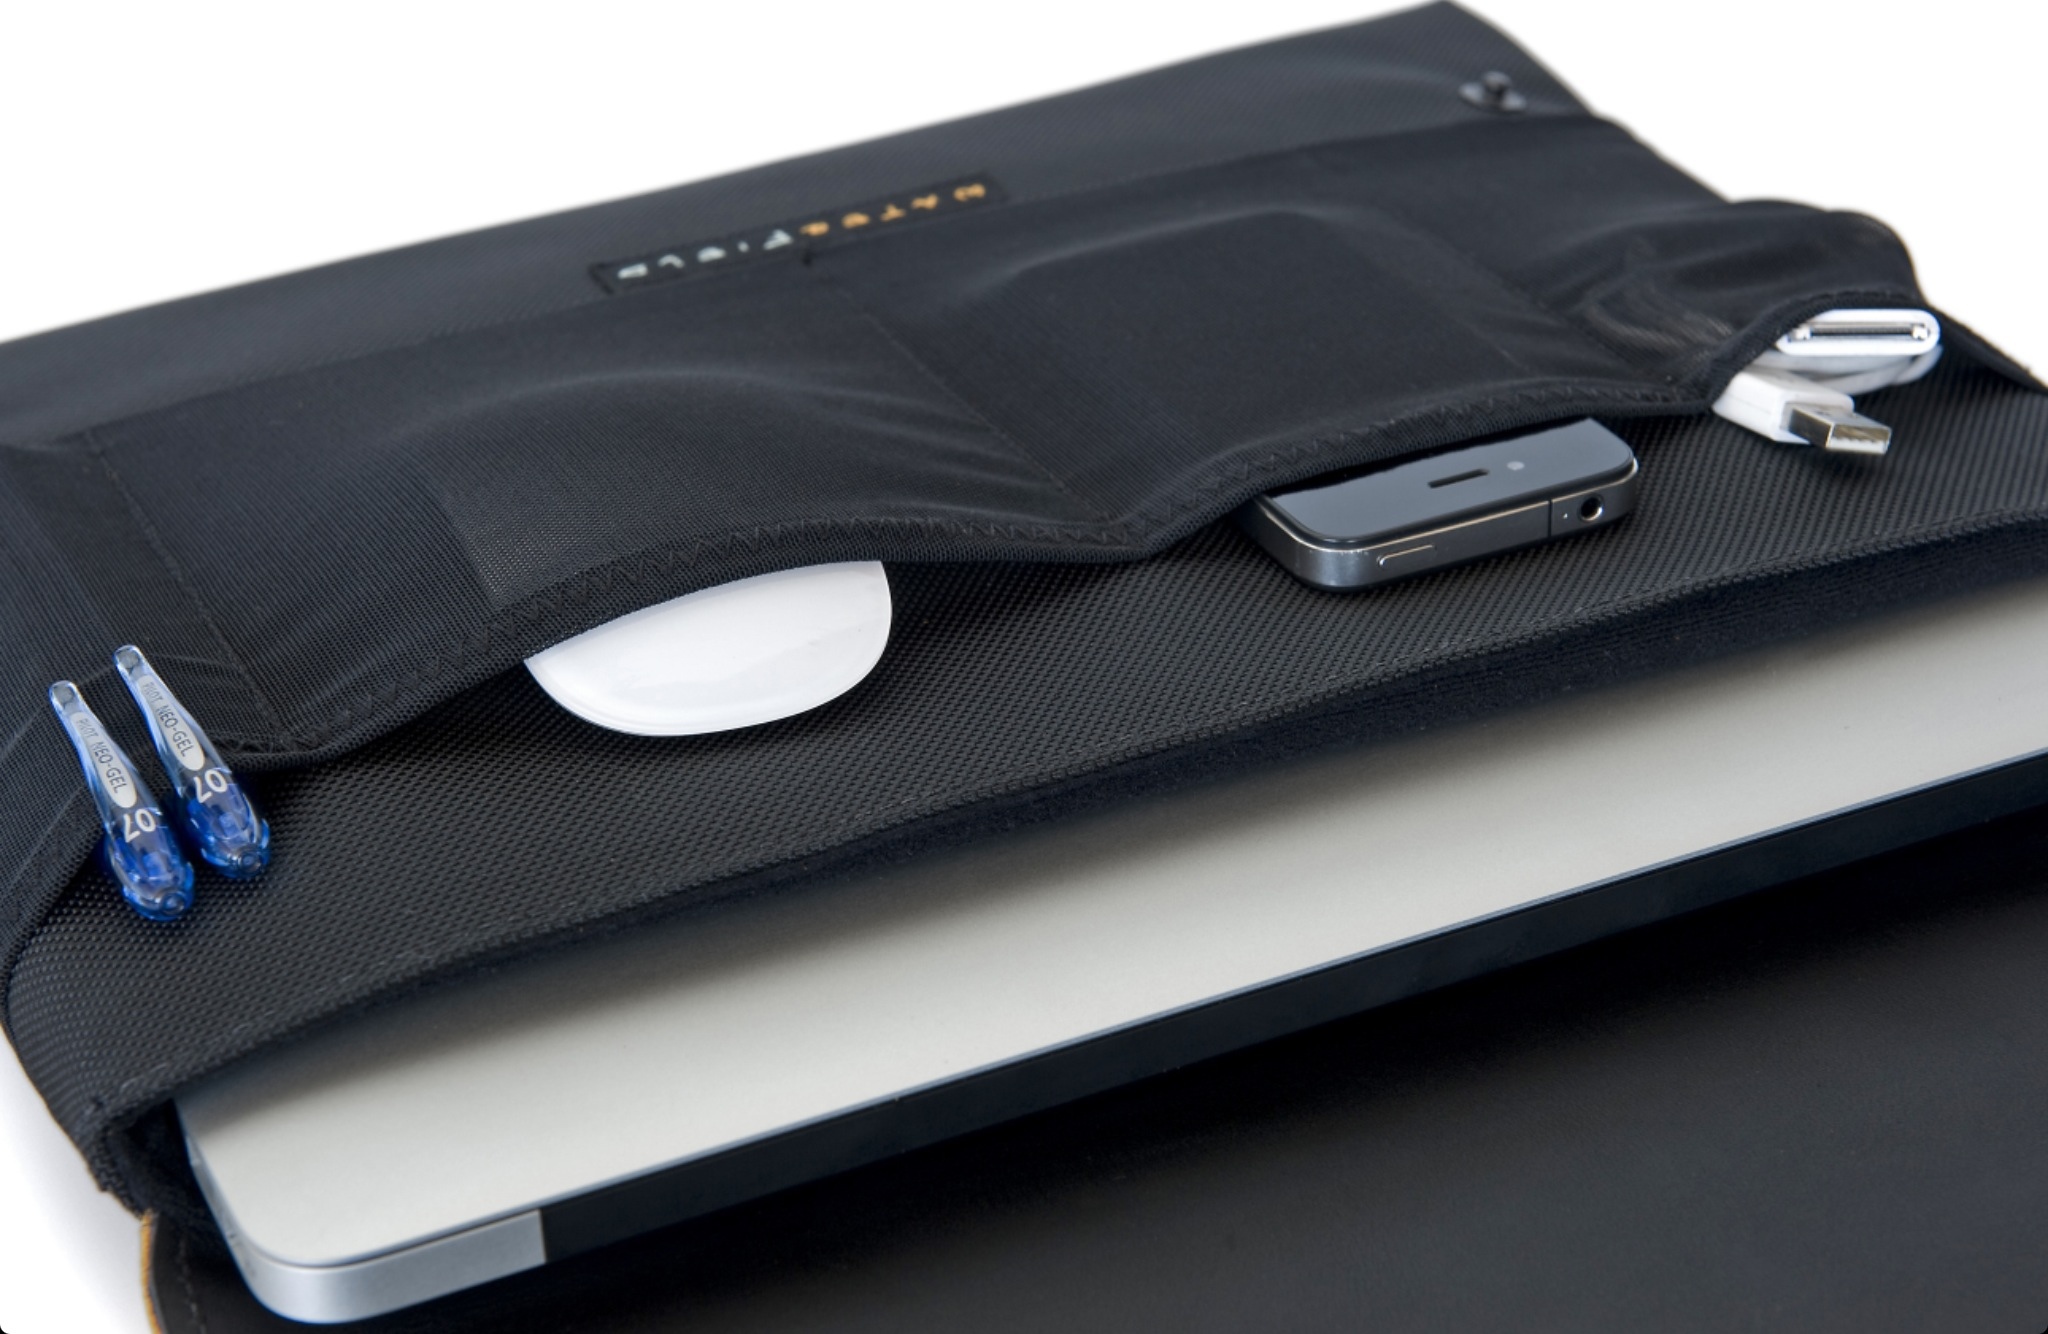 Waterfield Designs' CitySlicker Brings Style and Minimalist Protection to Your MacBook Air